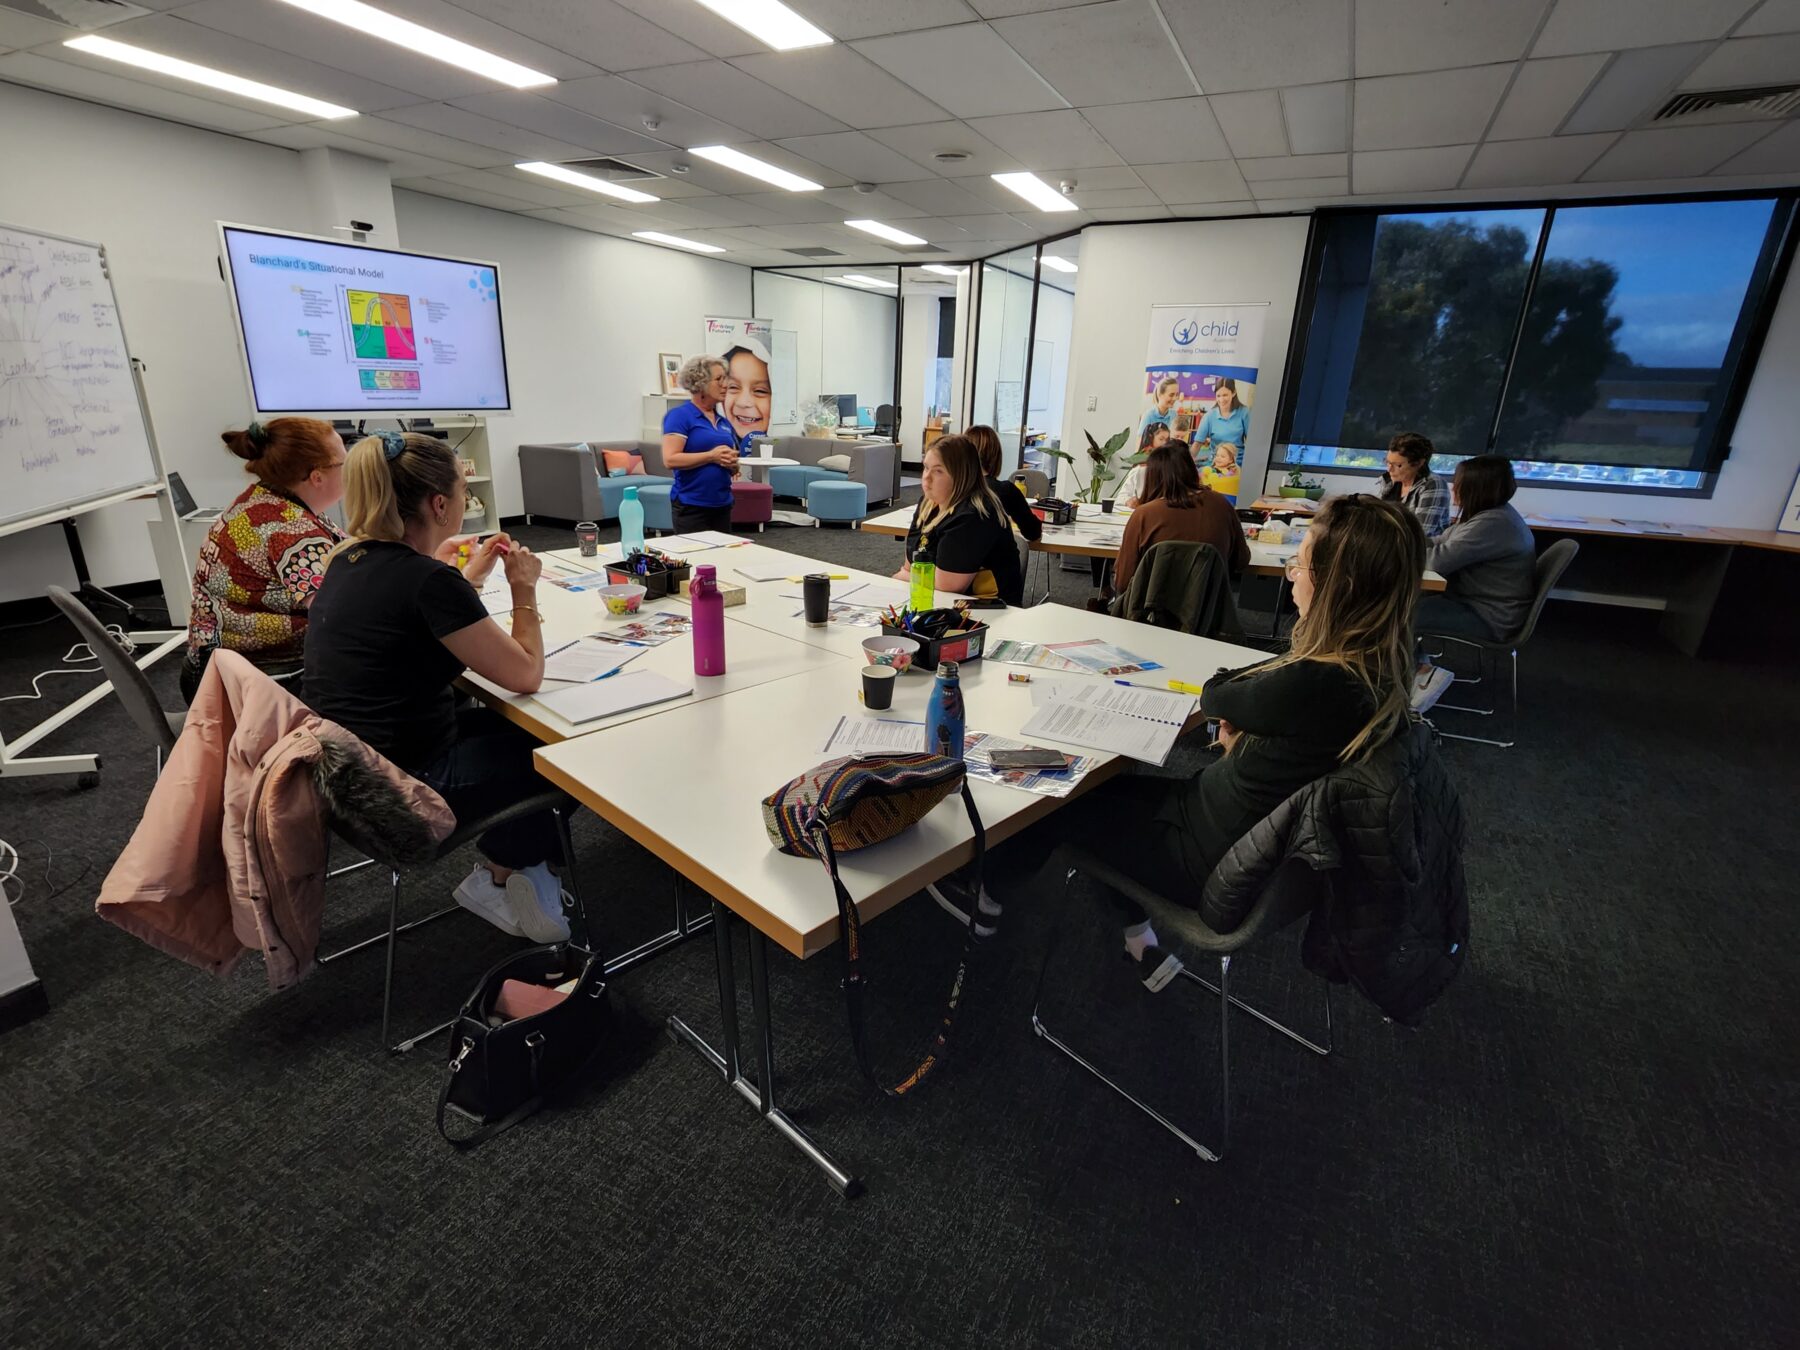 An image of Child Australia staff members sitting at a desk talking and planning